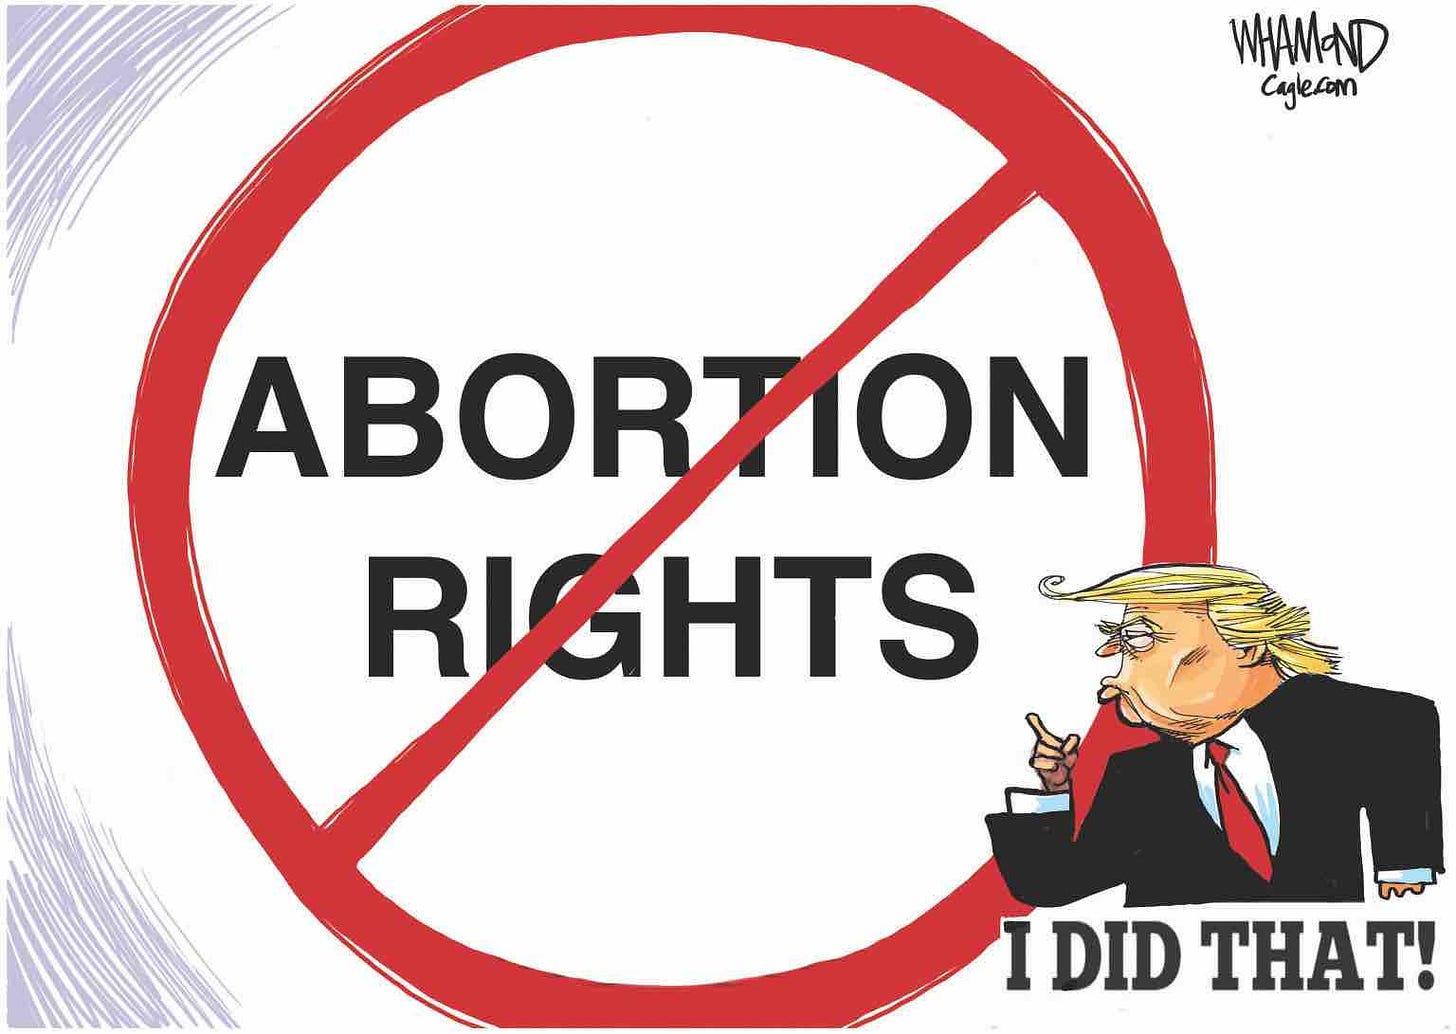 Hold MAGA Republicans accountable for abortion bans and denying women emergency healthcare.